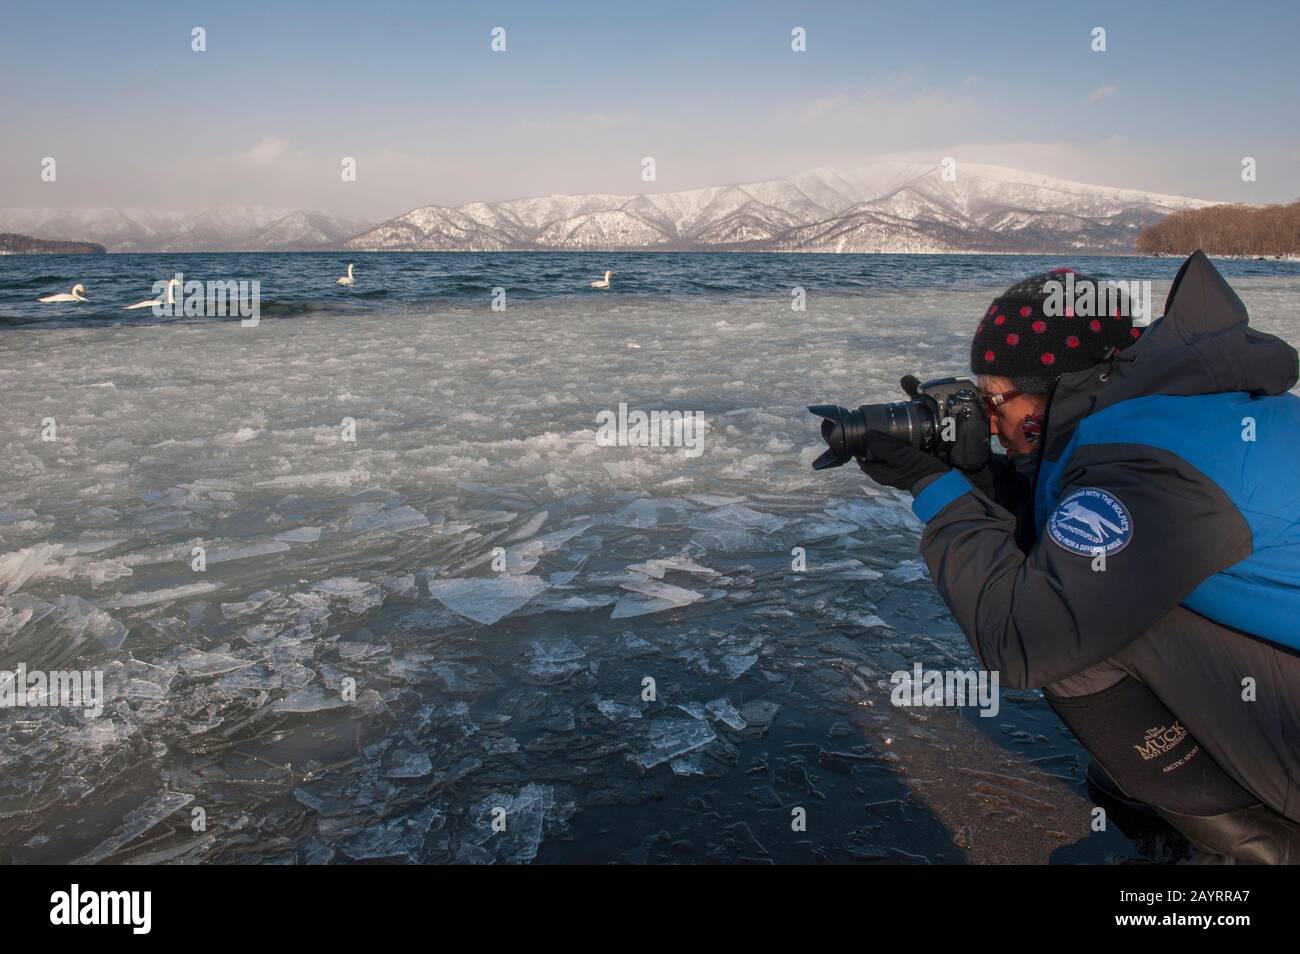 A tourist is photographing Whooper swans (Cygnus cygnus) along the shore of Lake Kussharo, which is a caldera lake in Akan National Park, eastern Hokk Stock Photo